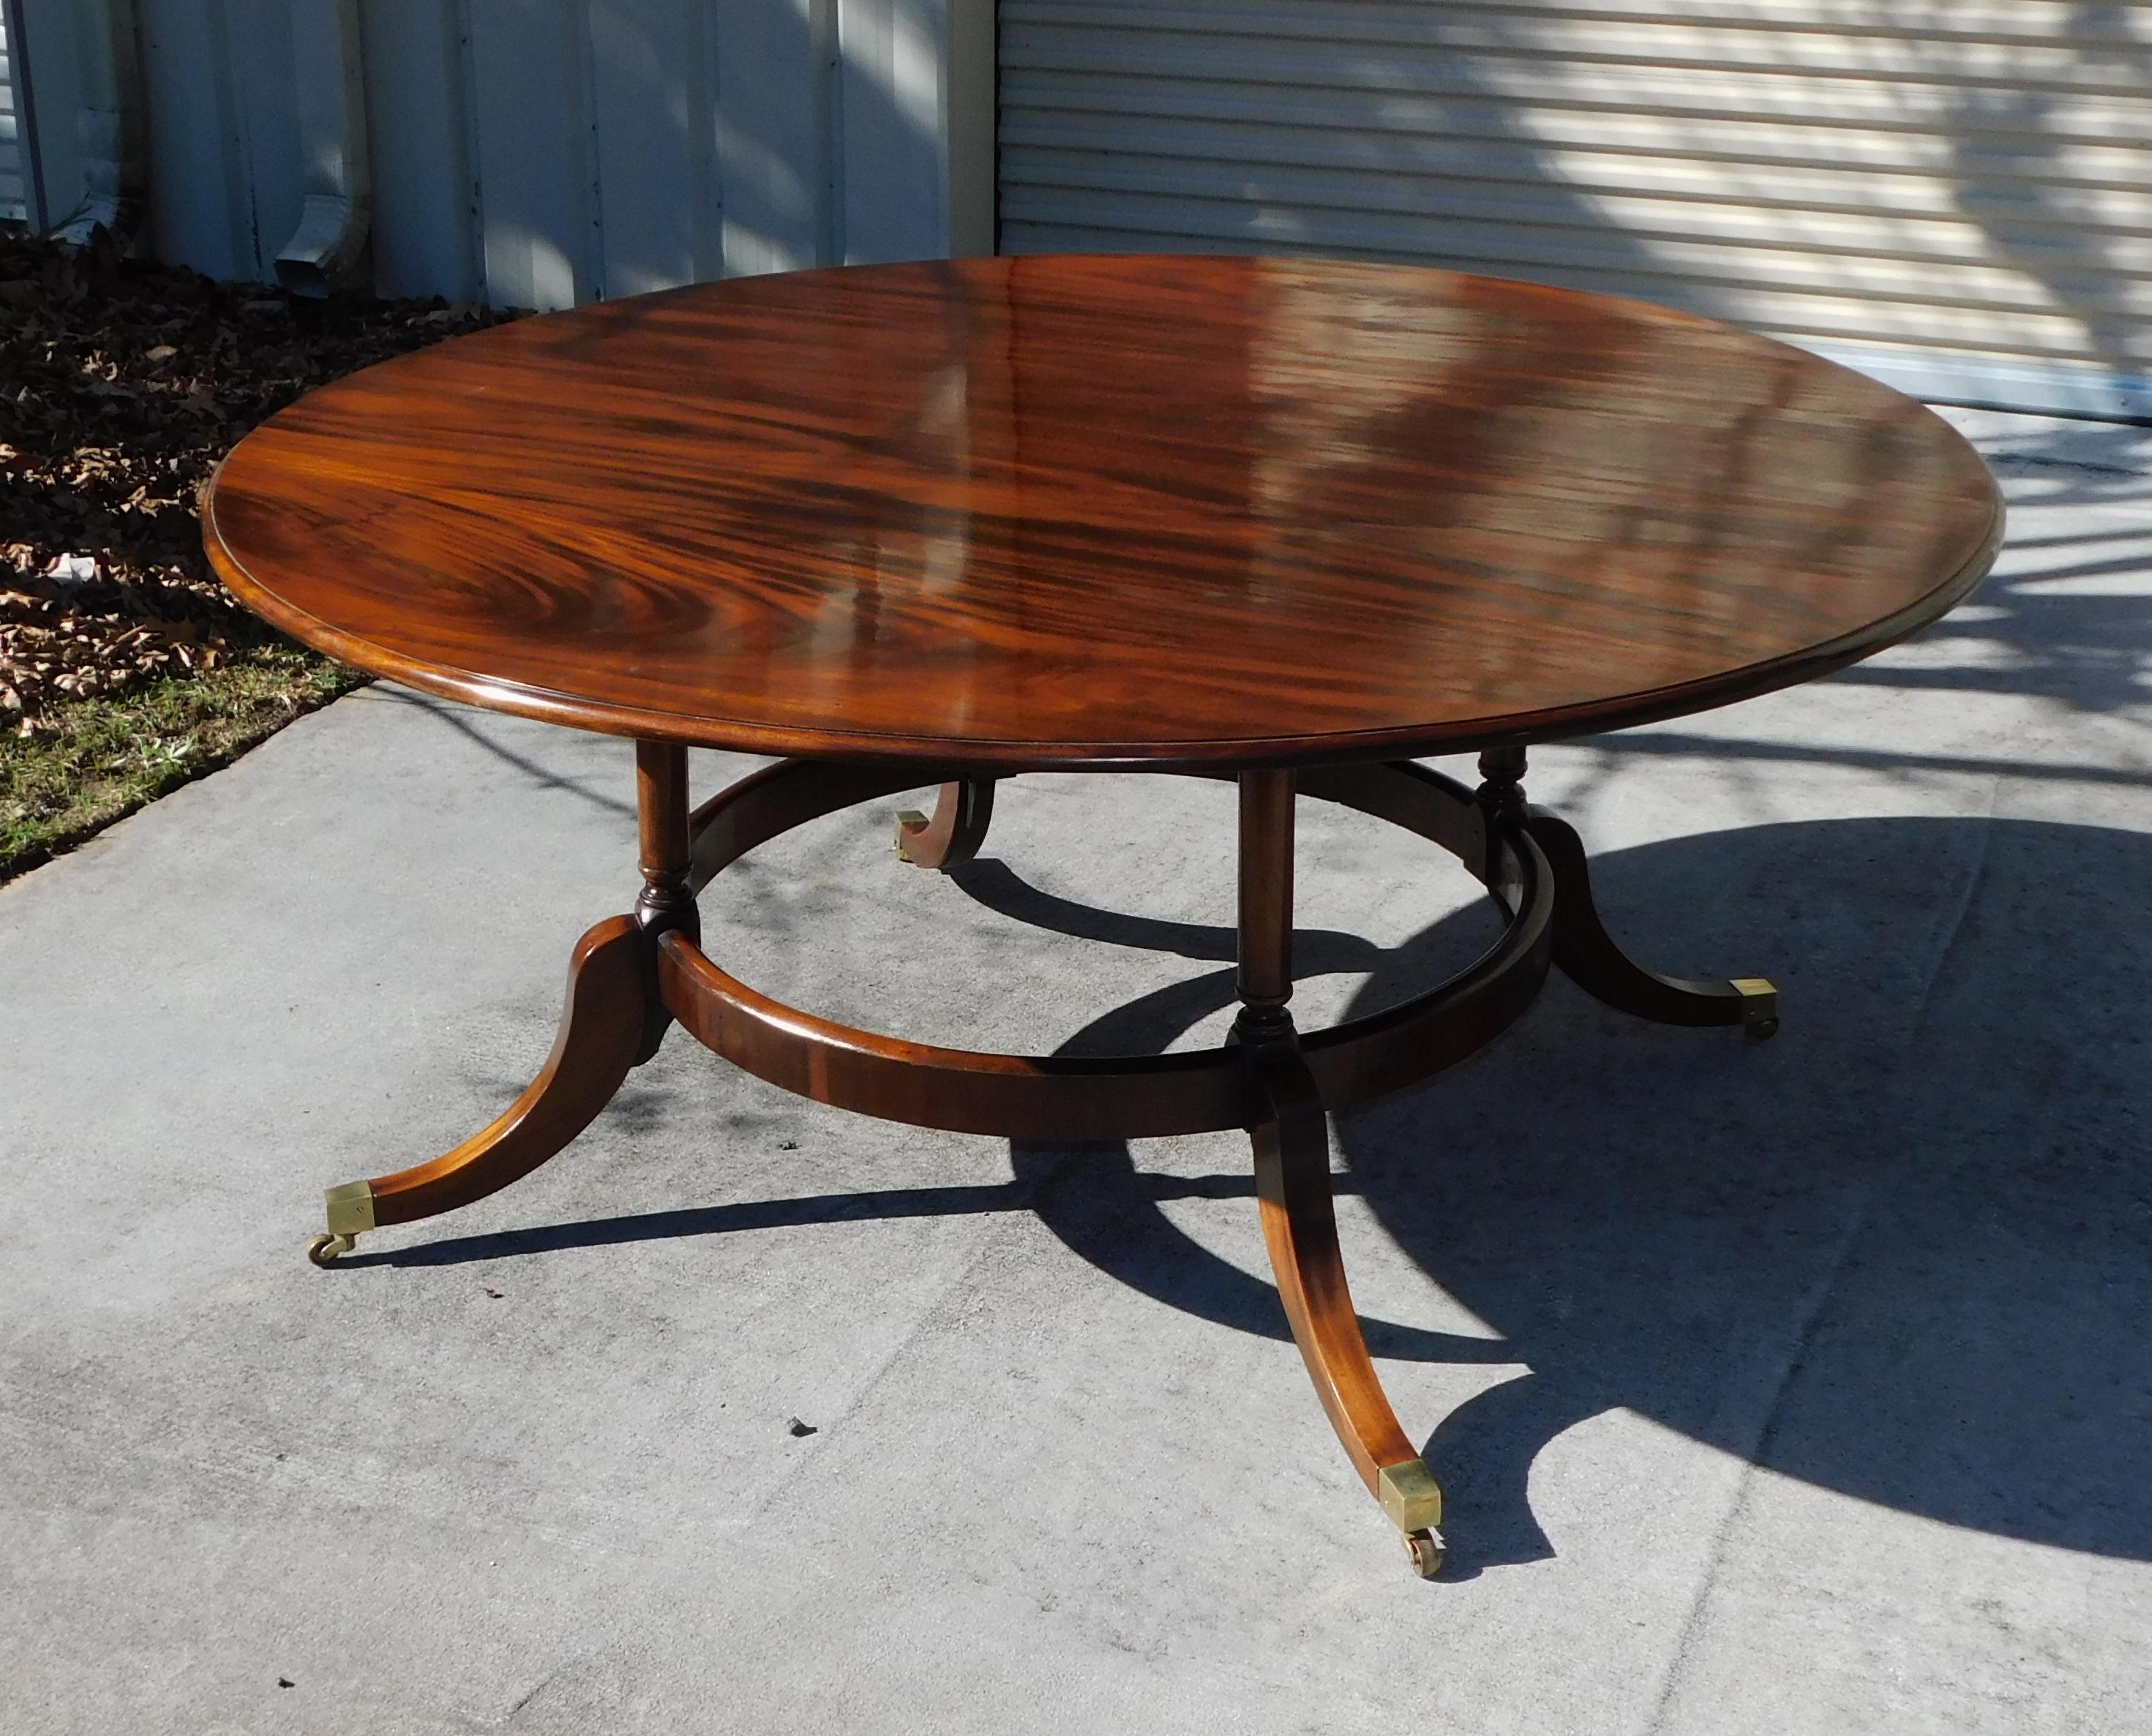 Hand-Carved English Regency Mahogany Circular Dining Table with Splayed Legs on Casters 1850 For Sale